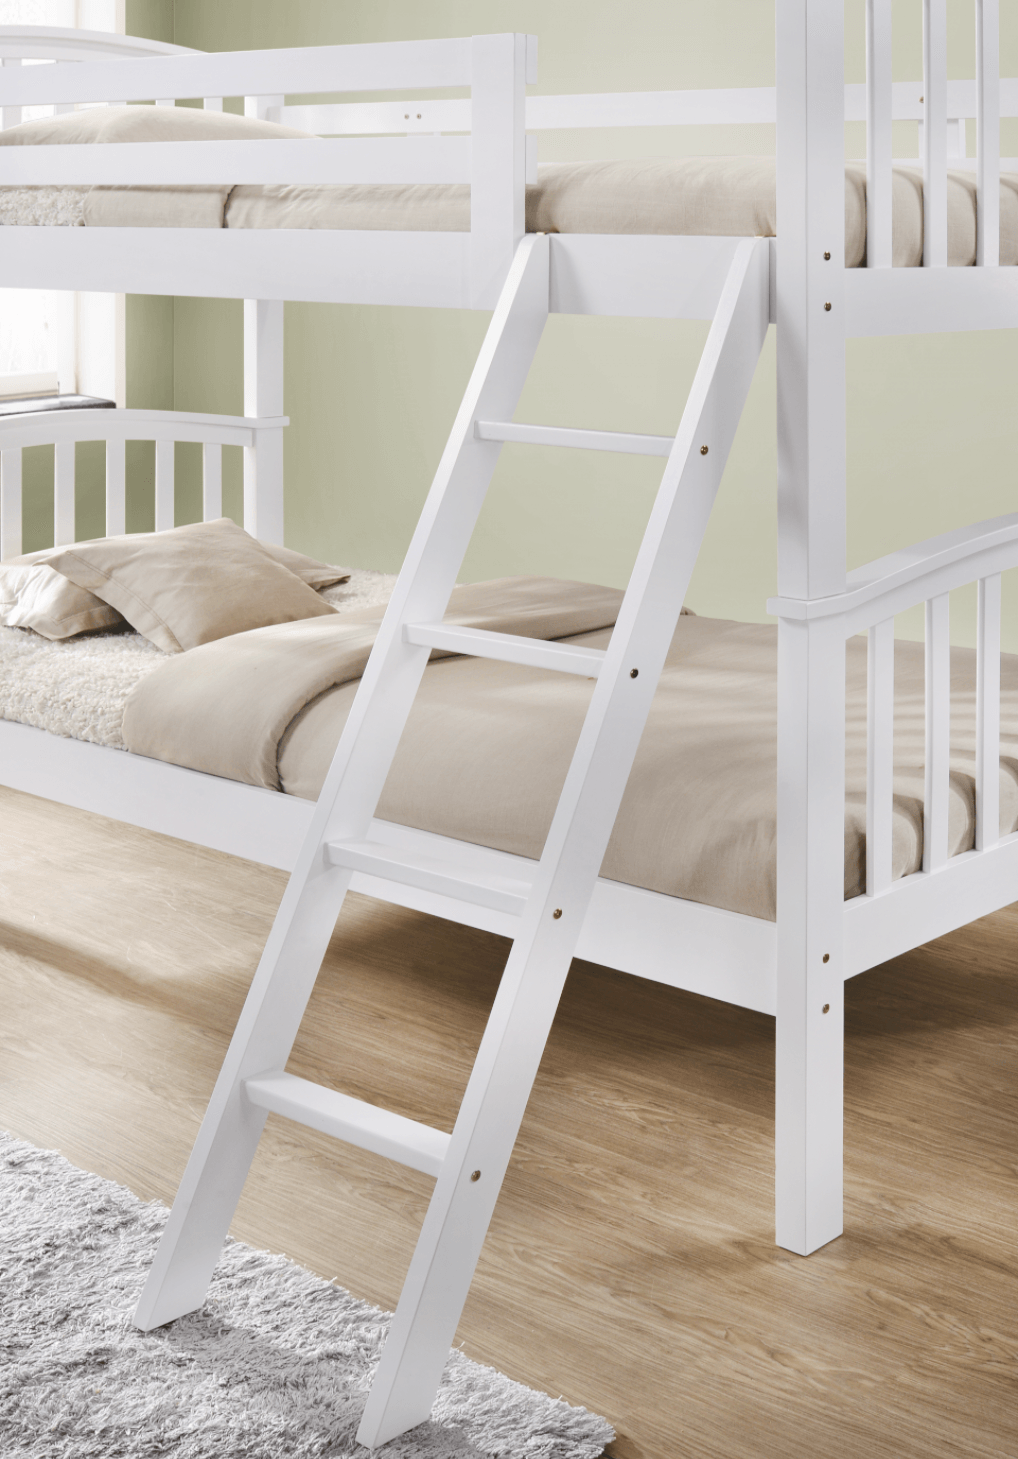 curved wooden bunk bed